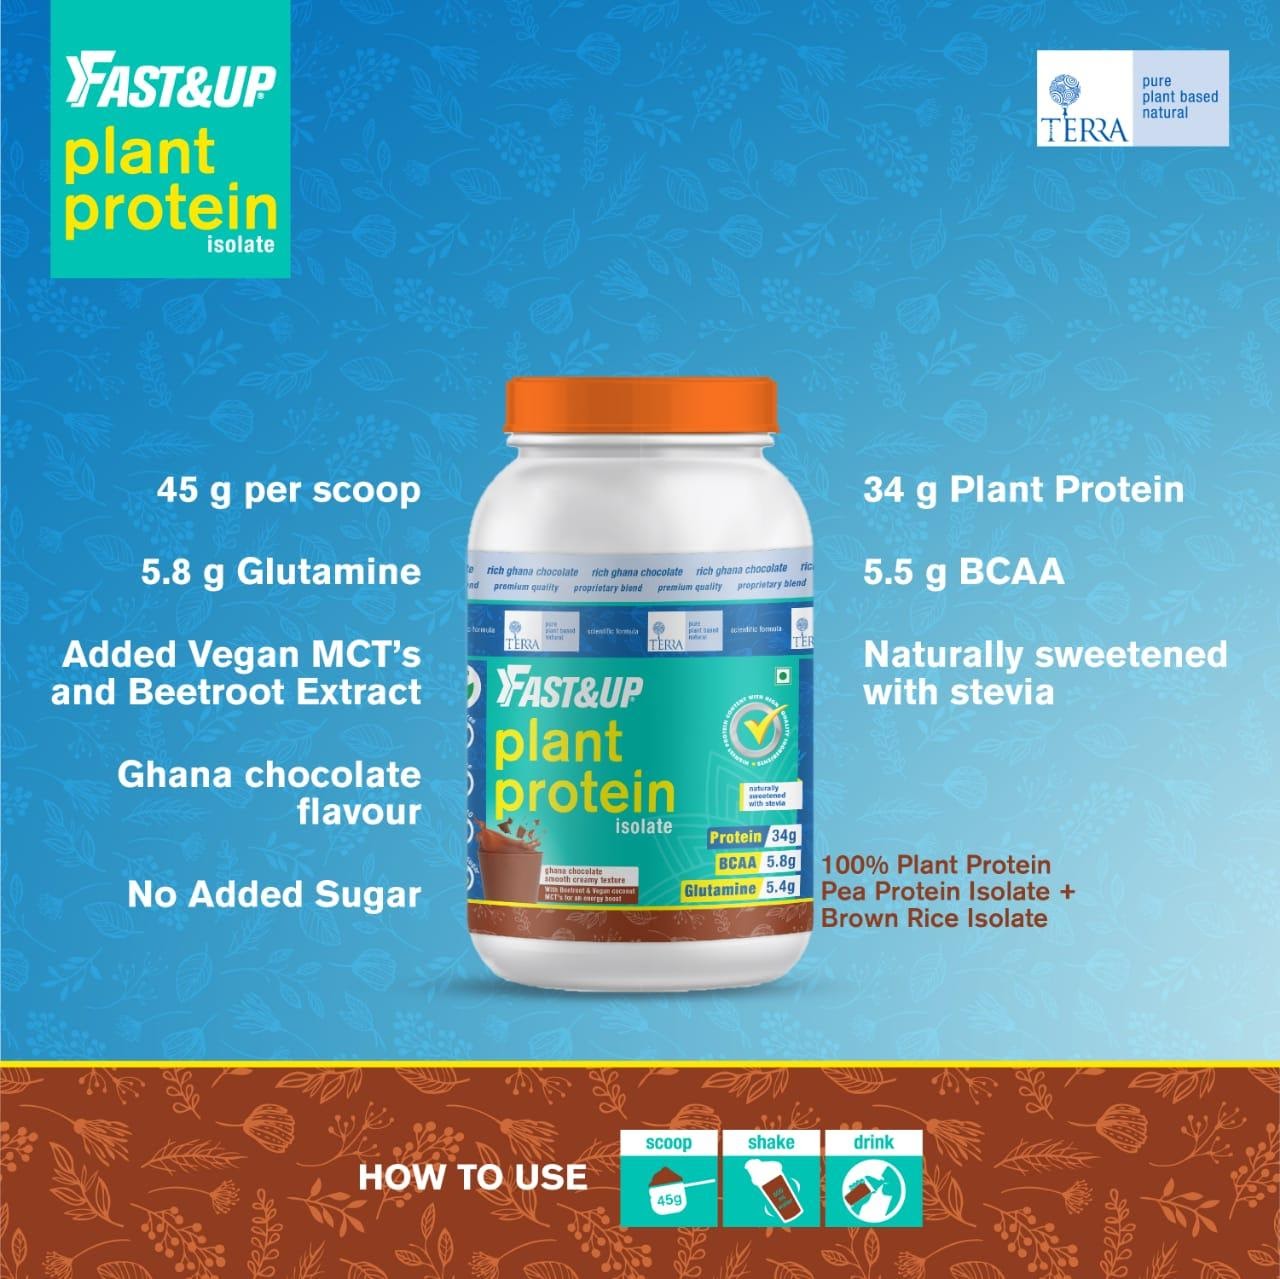 Introducing Fast&Up Plant Protein Isolate